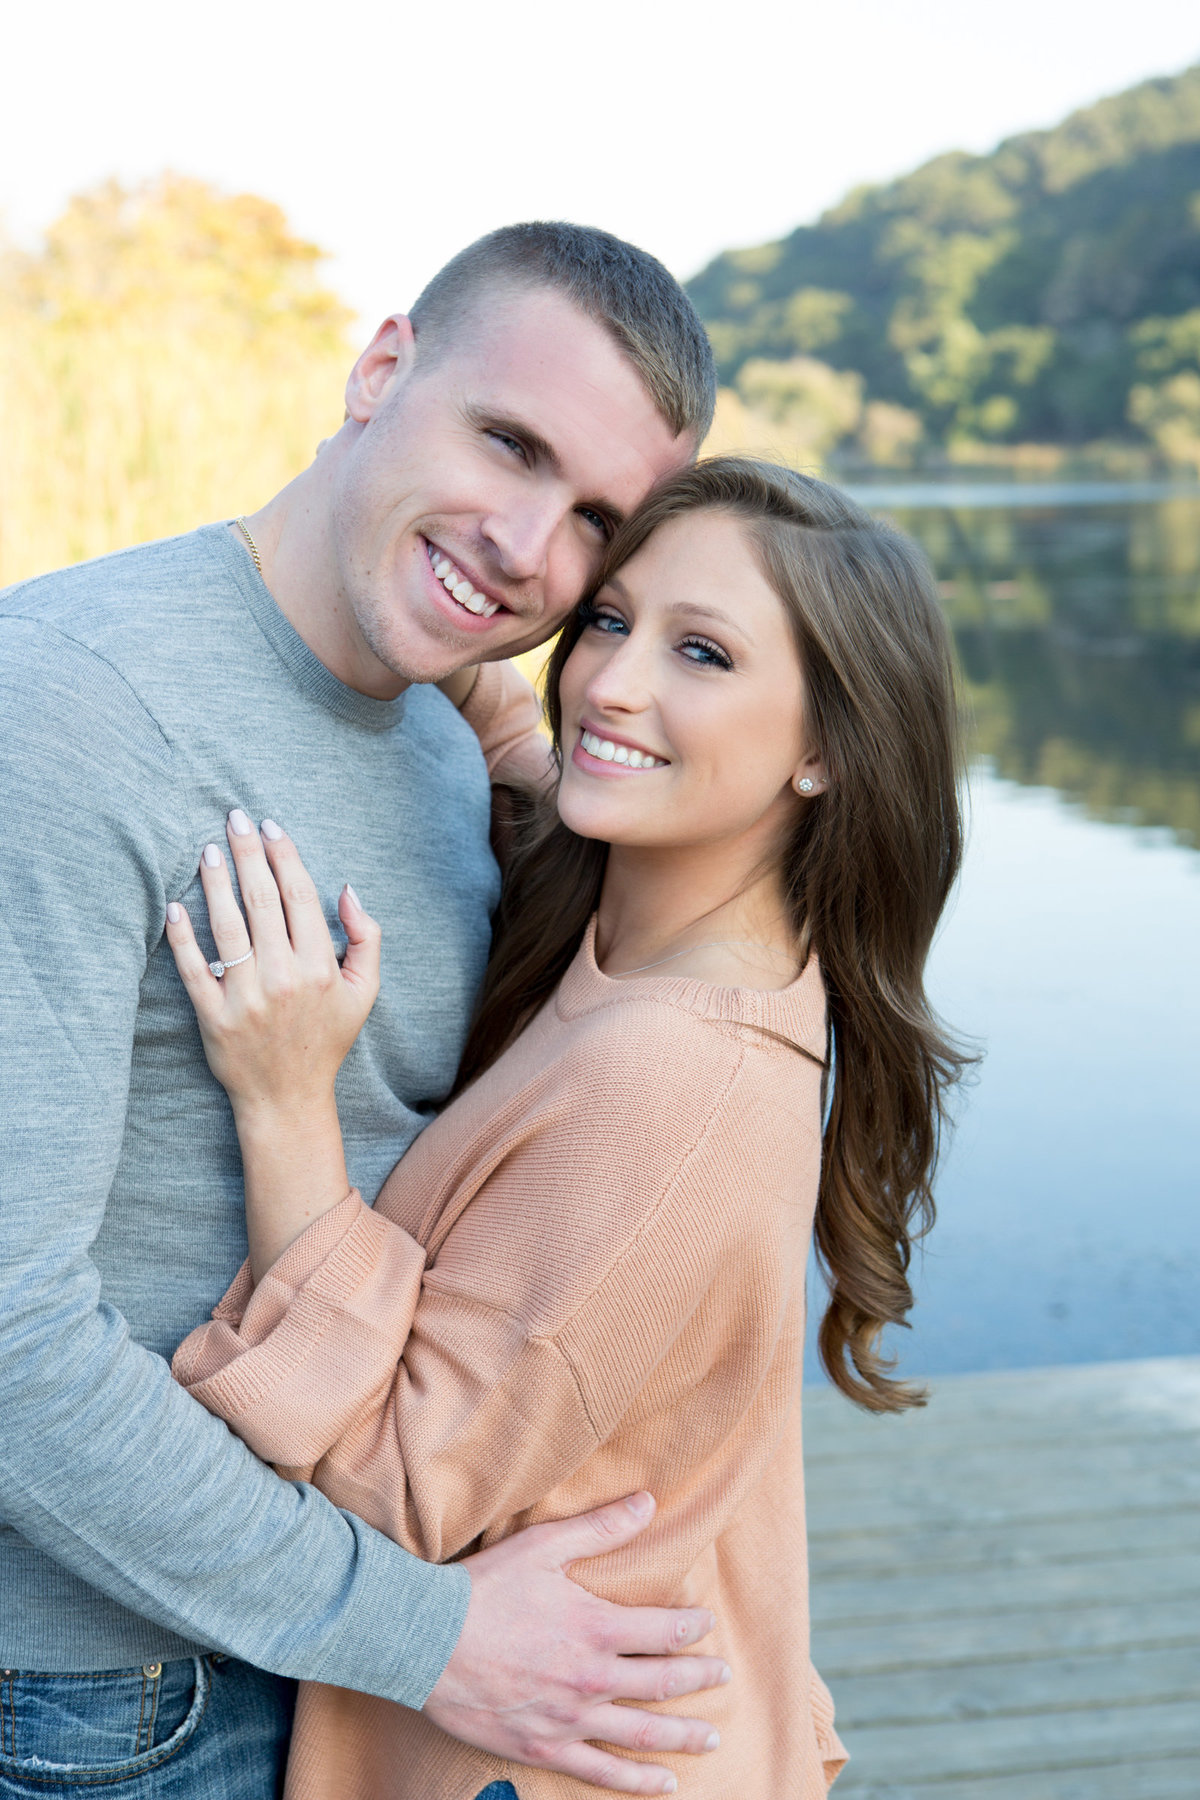 Lake Backdrop Engagement Photos at Foothills Park in Palo Alto California young couple